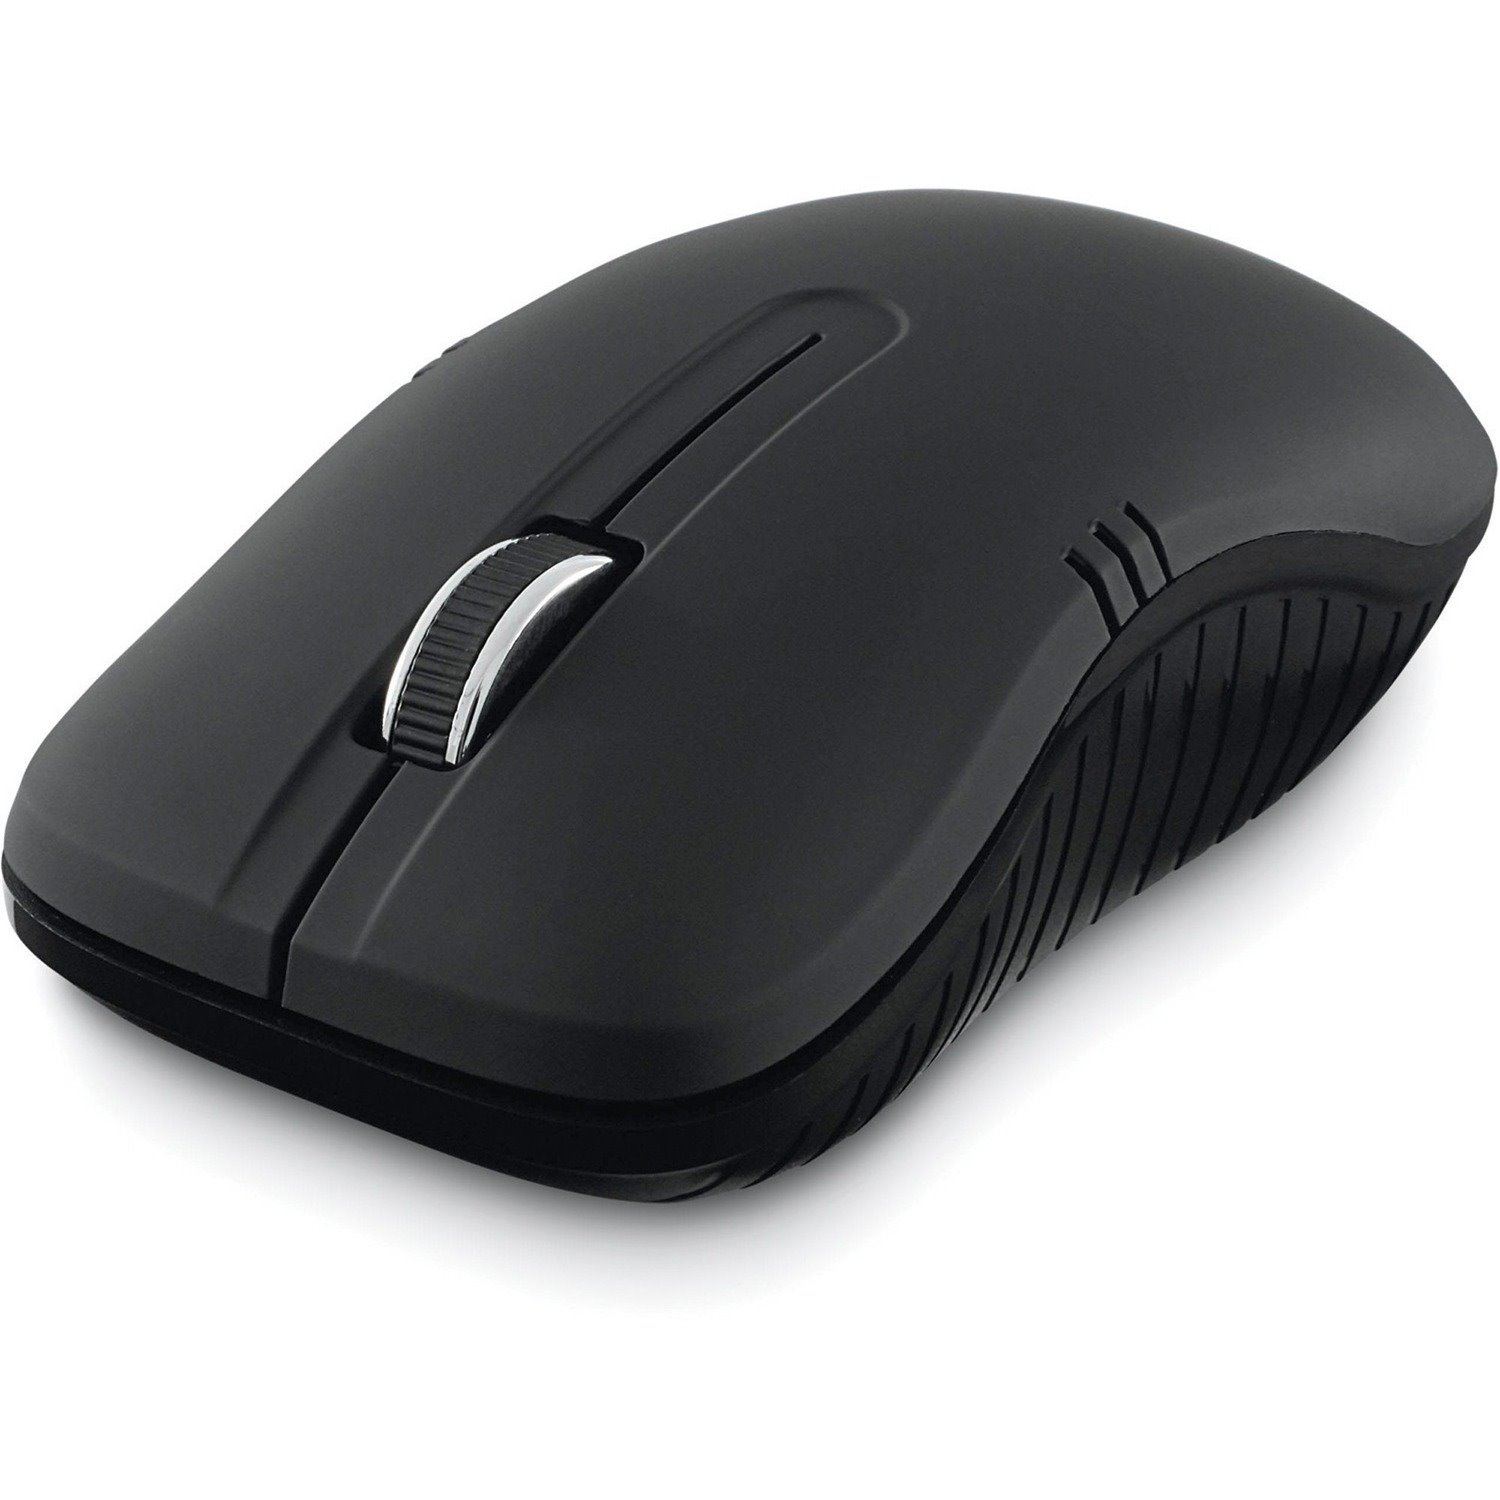 Verbatim Commuter Mouse - Radio Frequency - USB Type A - Optical - Matte Black